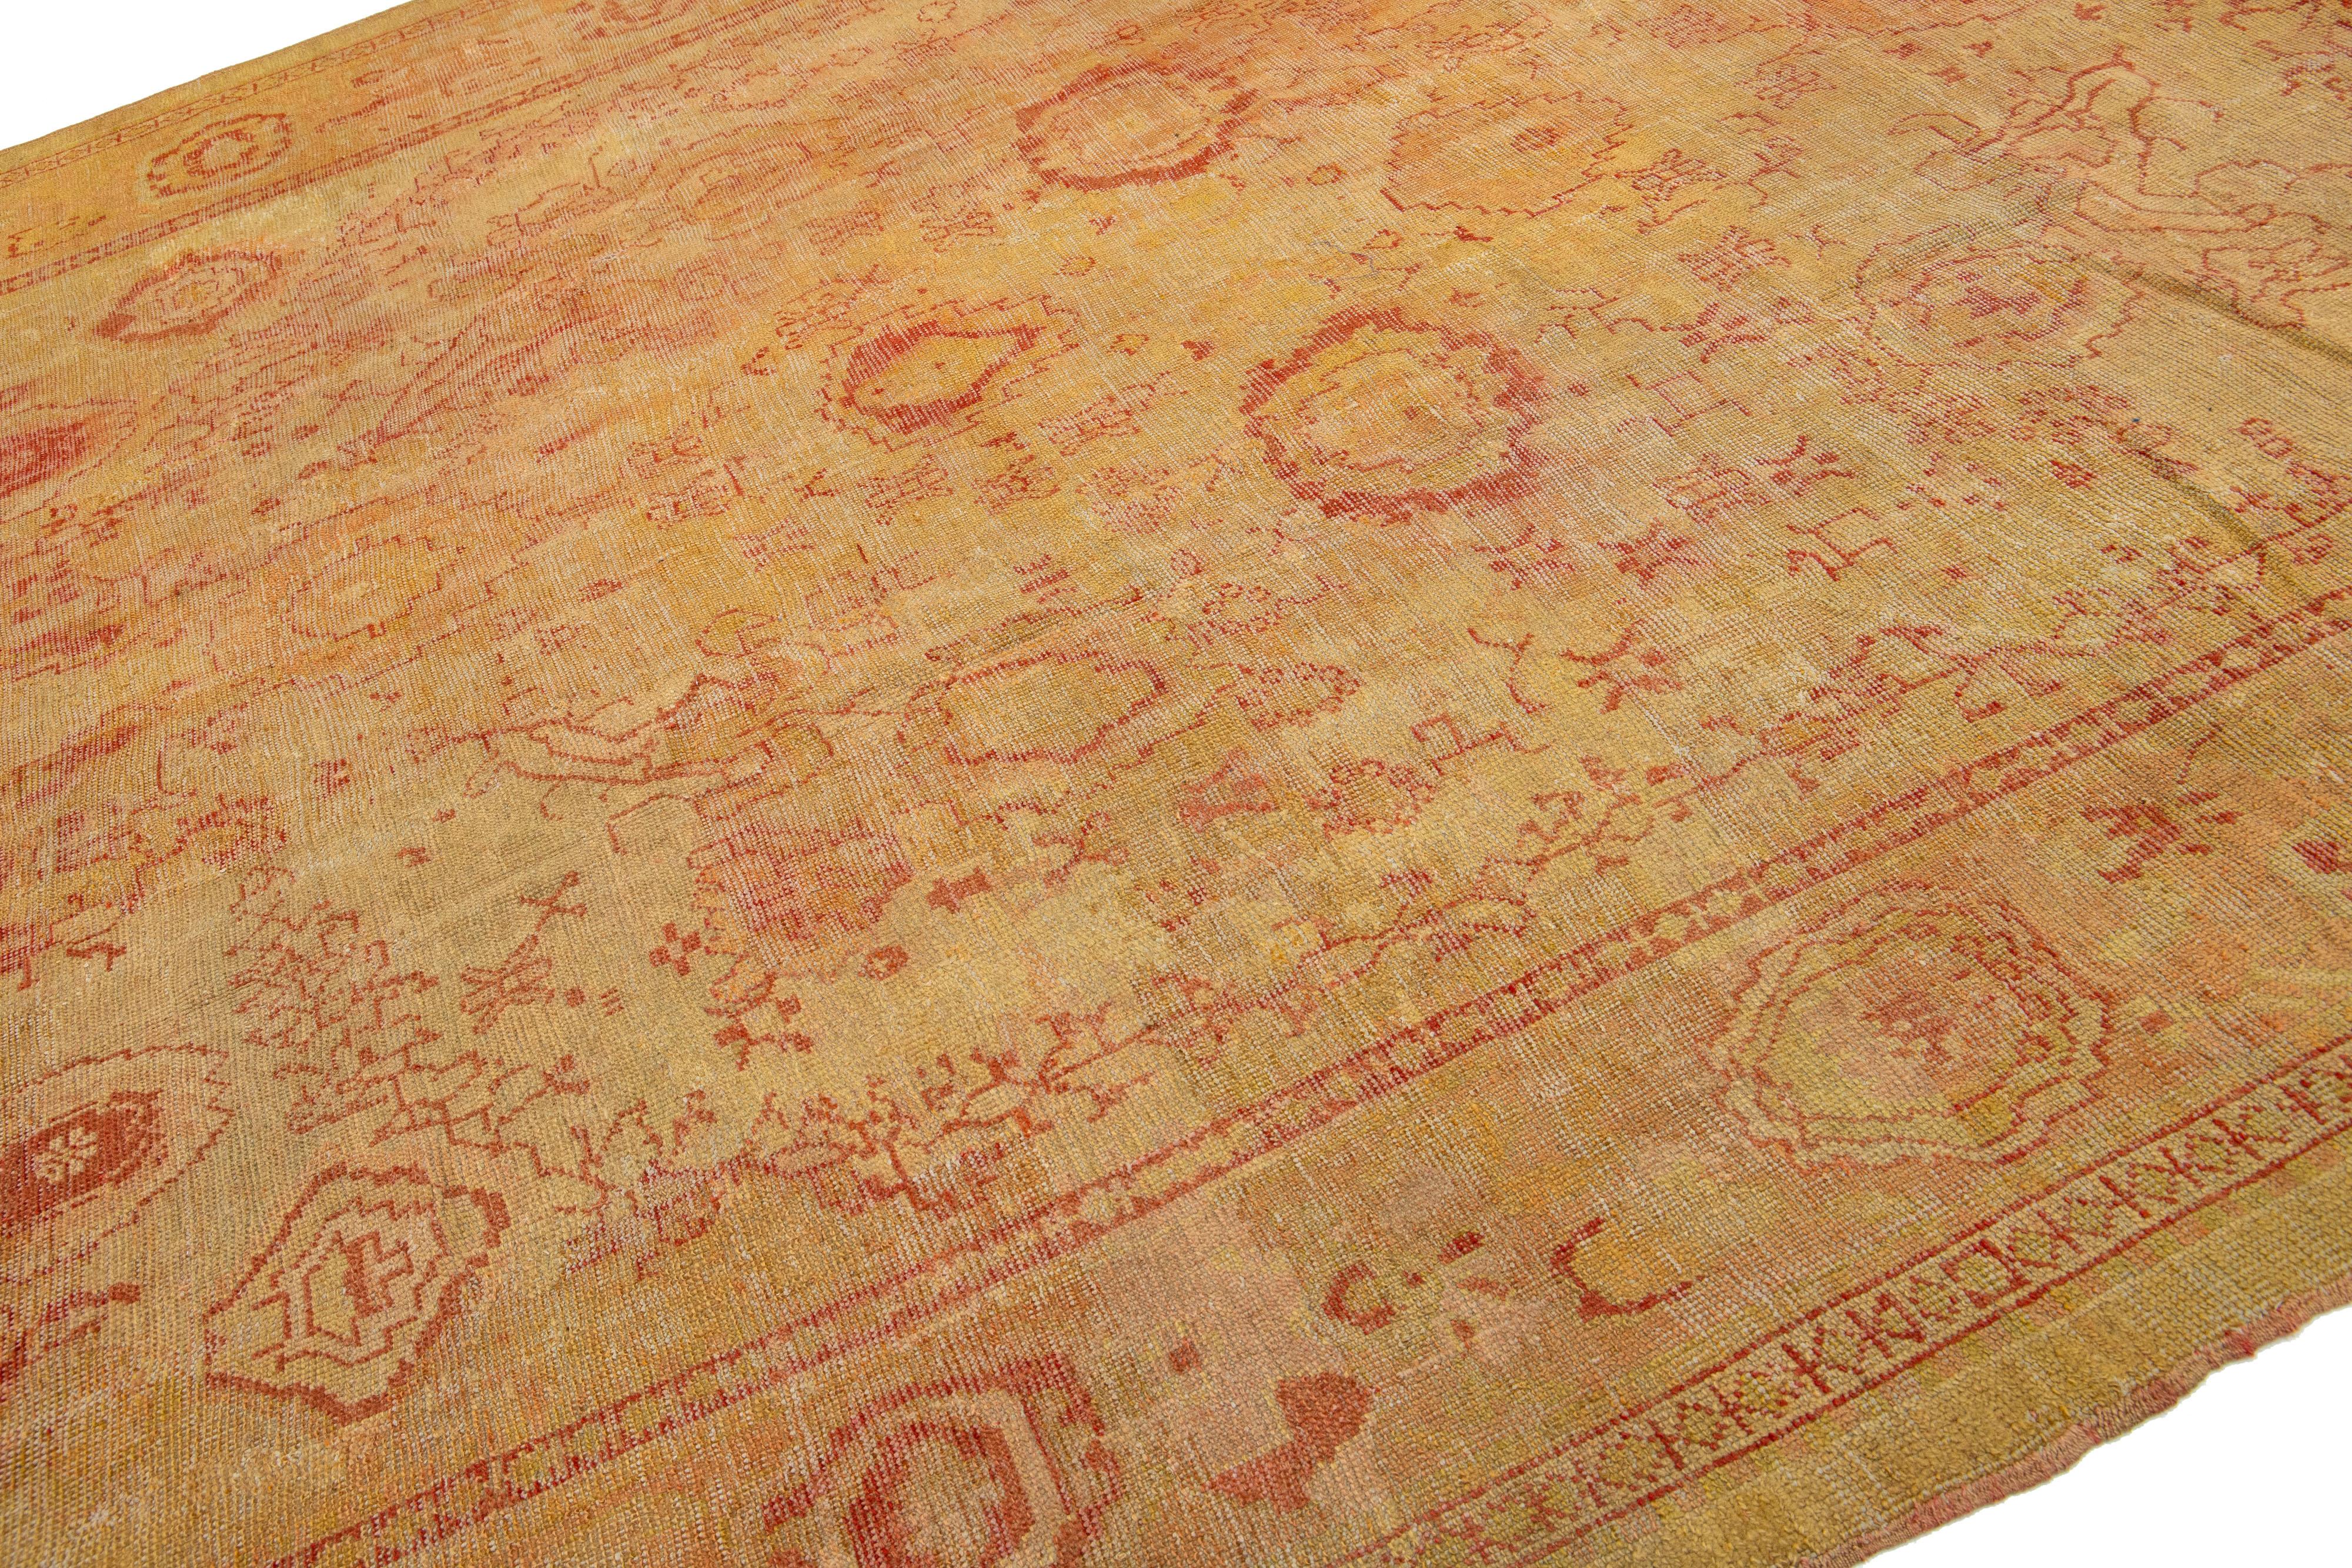 Hand-Knotted 19th. C. Turkish Oushak Wool Rug In Tan with Allover Floral Design For Sale